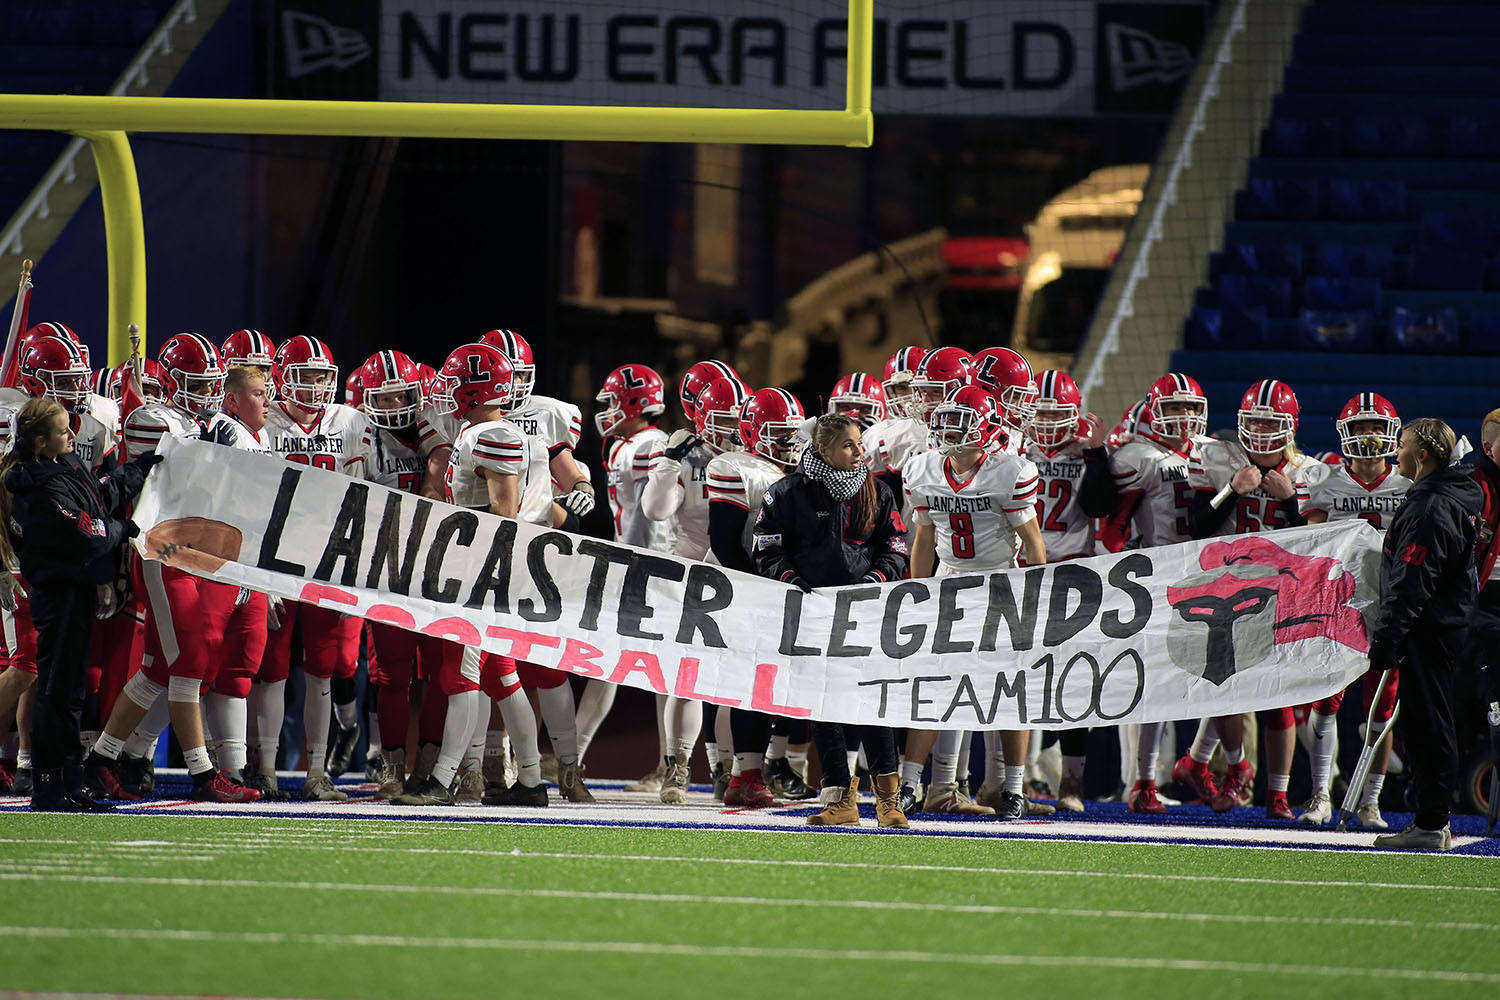 Lancaster Legends ready to take the field